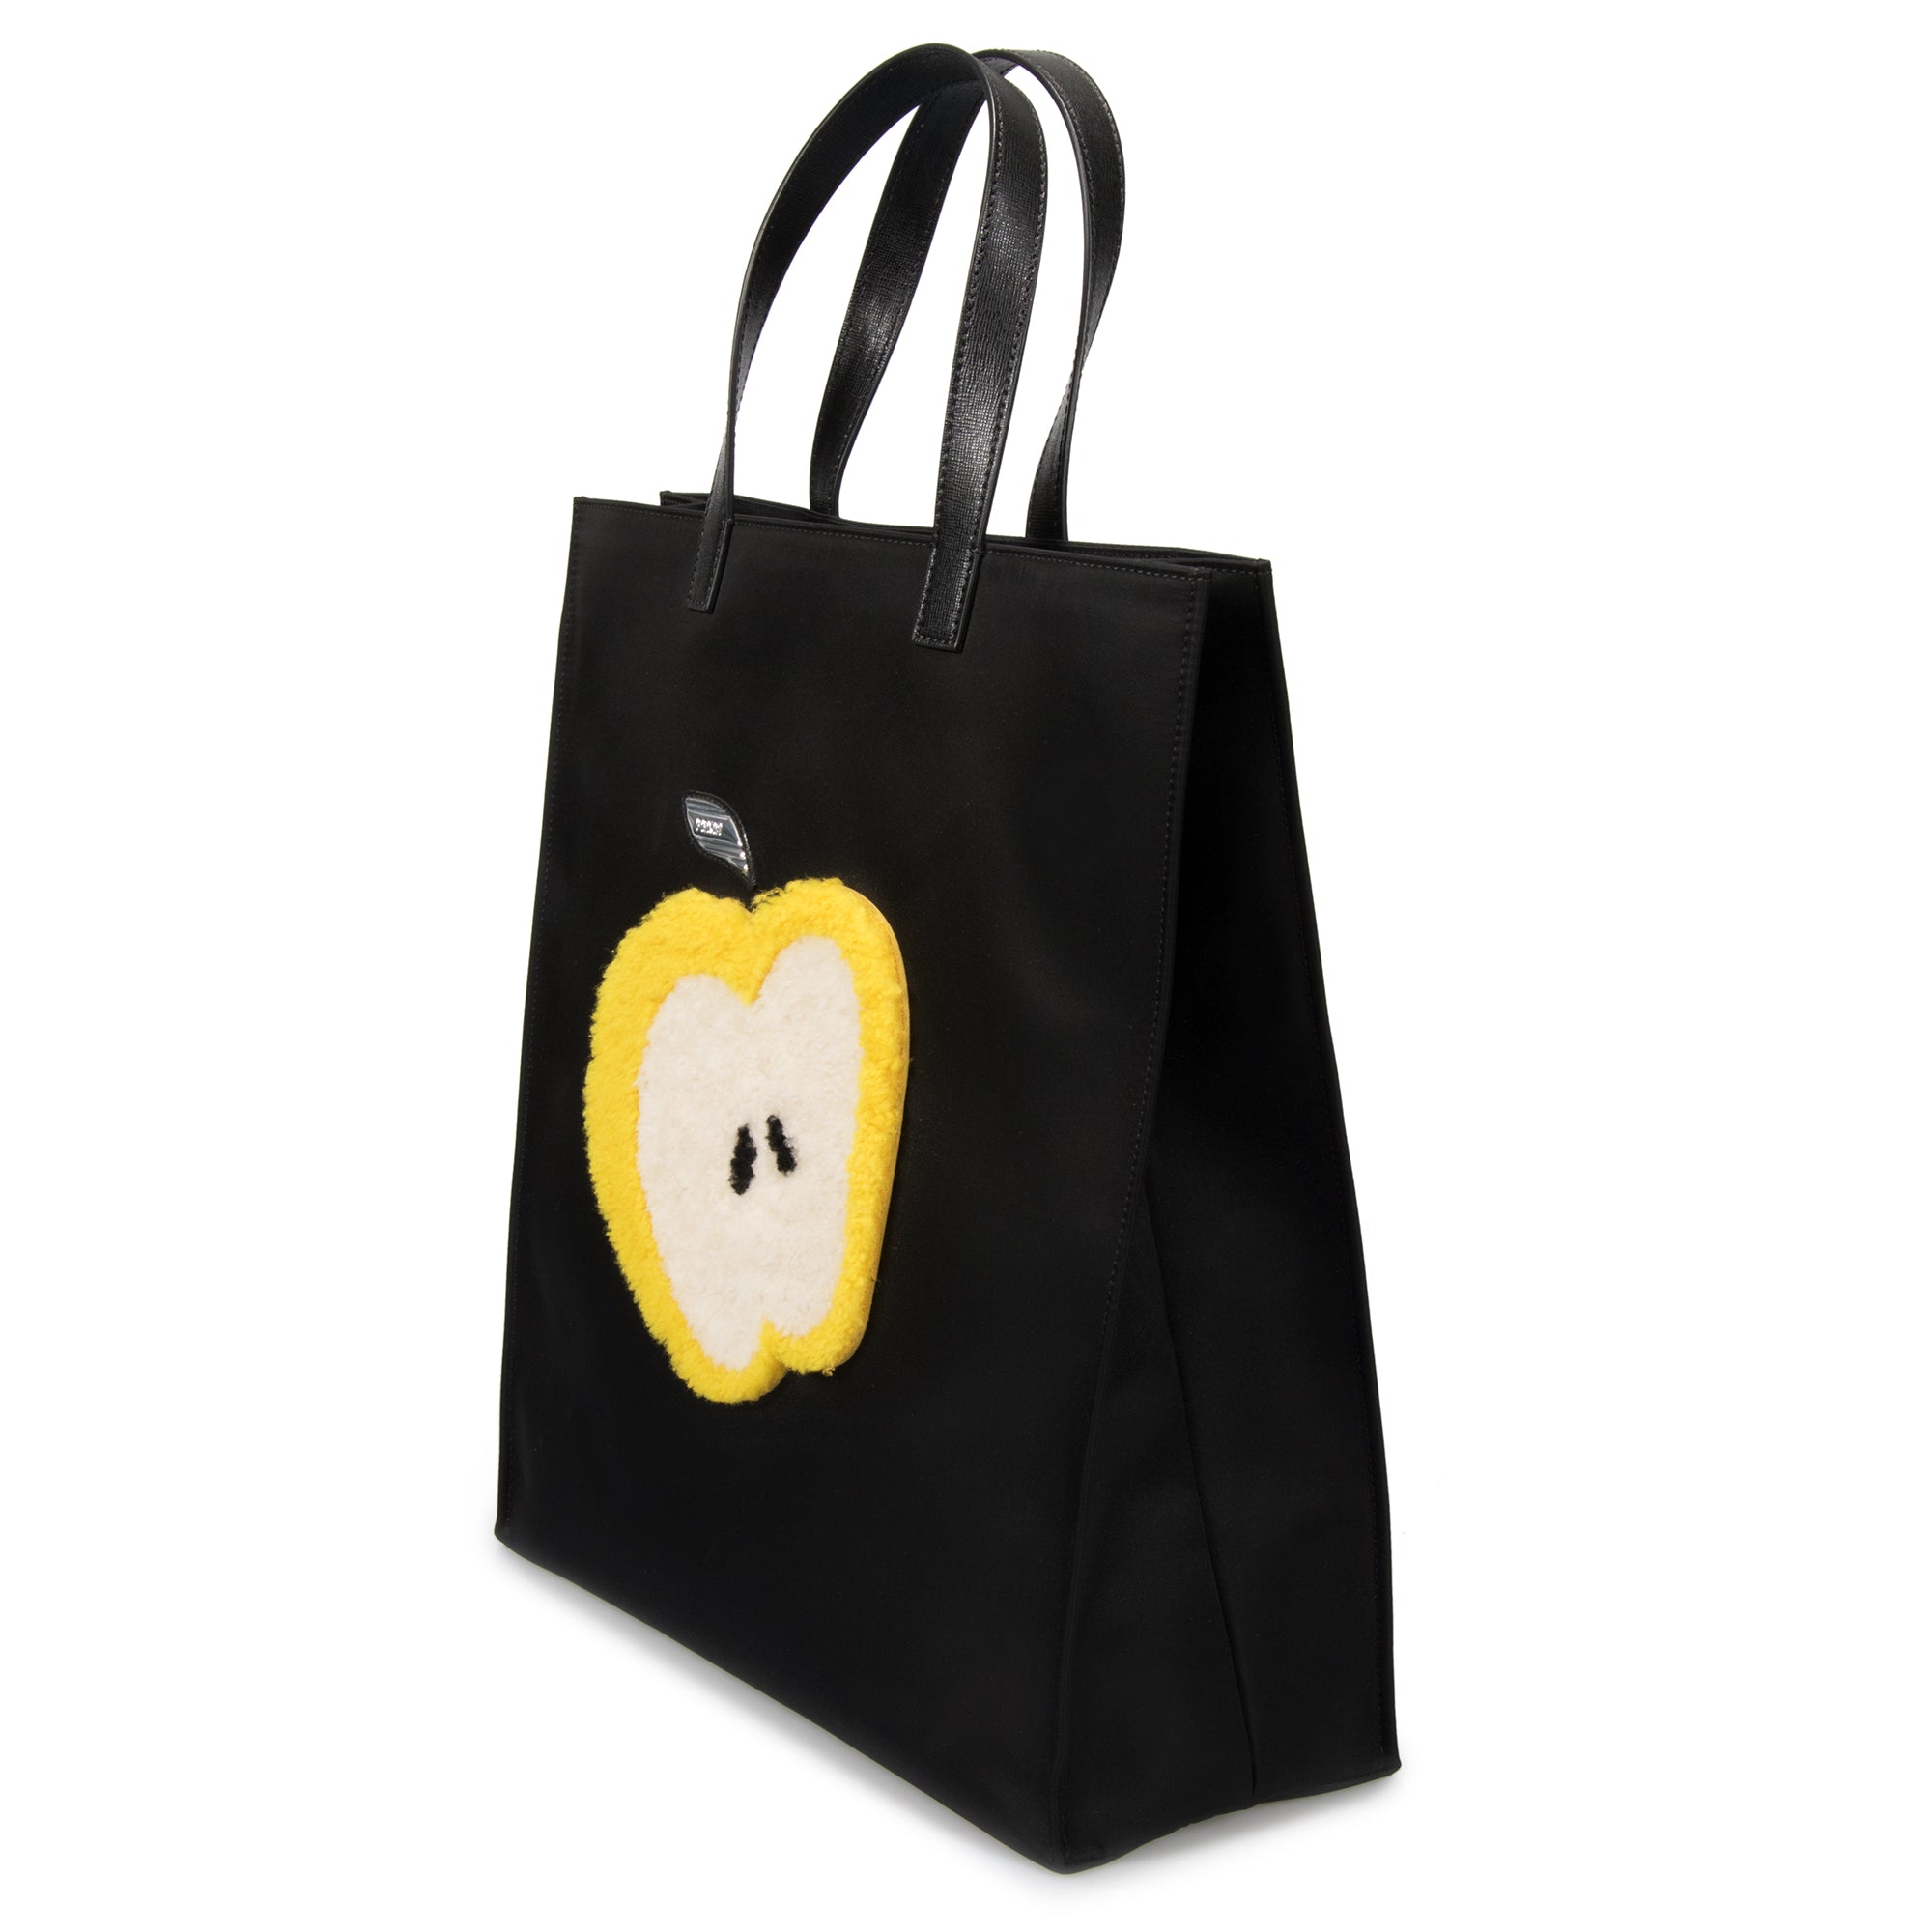 Fendi Large Black Grocery Tote with Apple Design